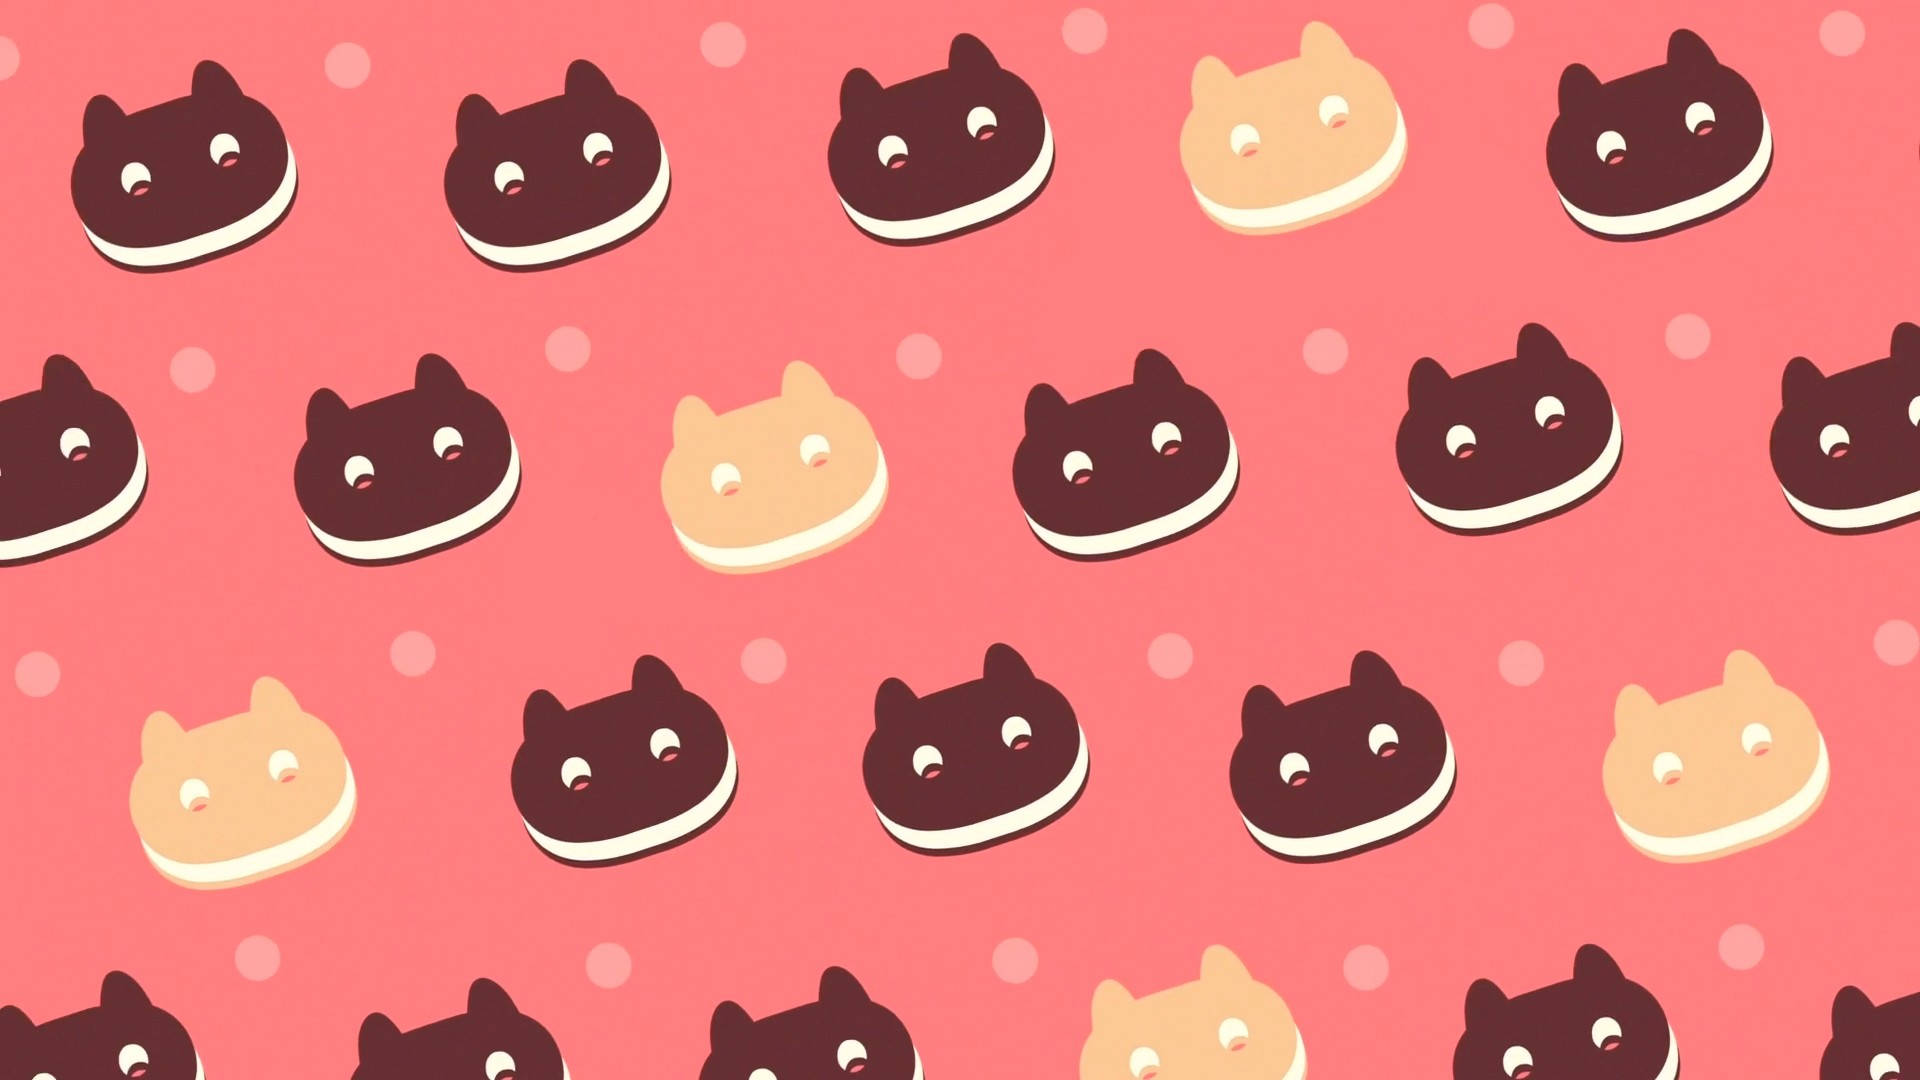 100+] Cute Aesthetic Pc Wallpapers | Wallpapers.com